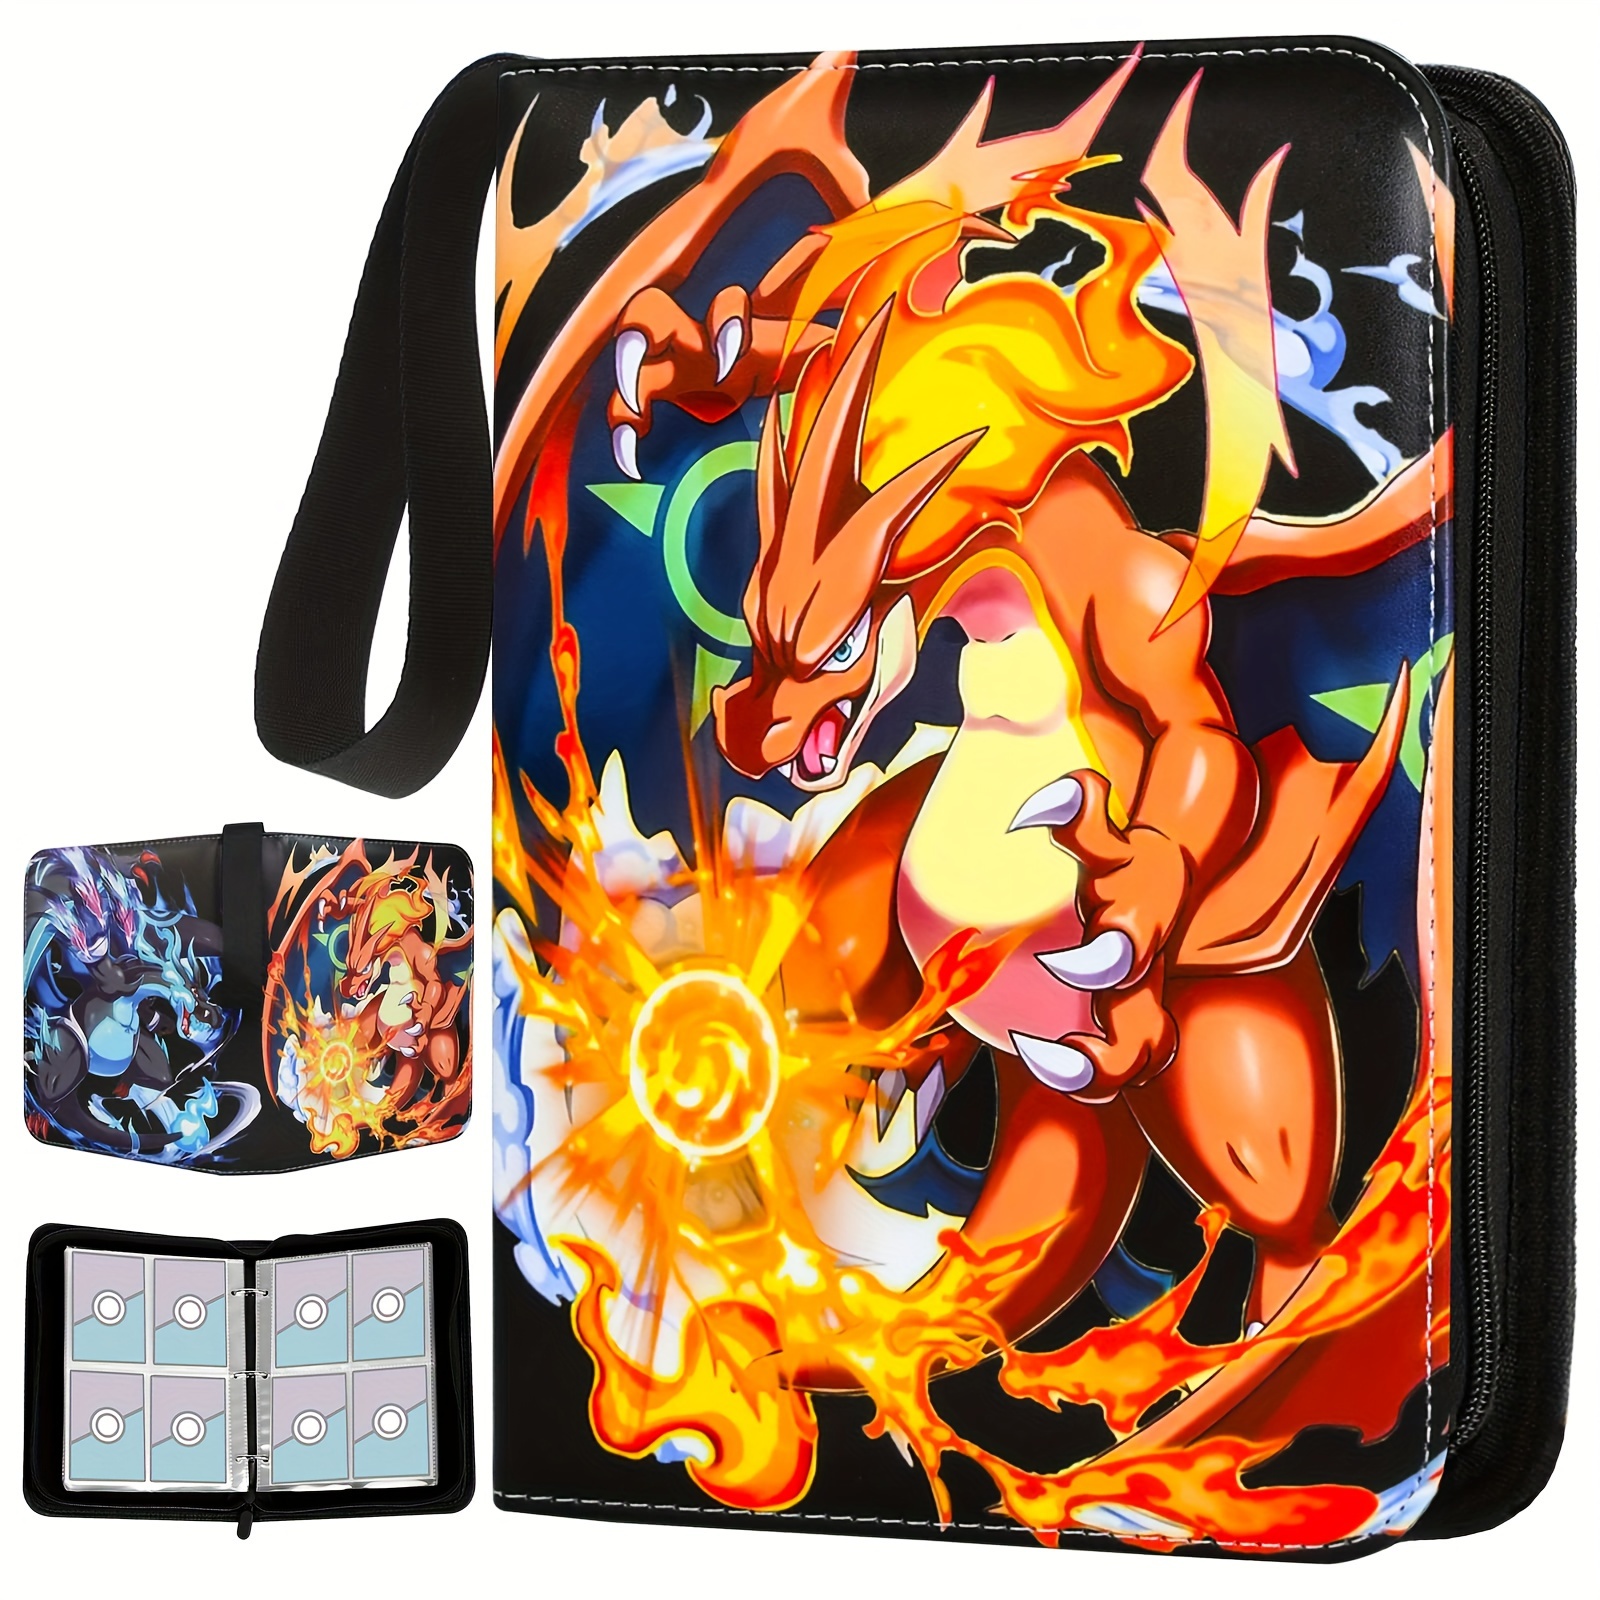 Pokemon Card Toploaders - Card Collector